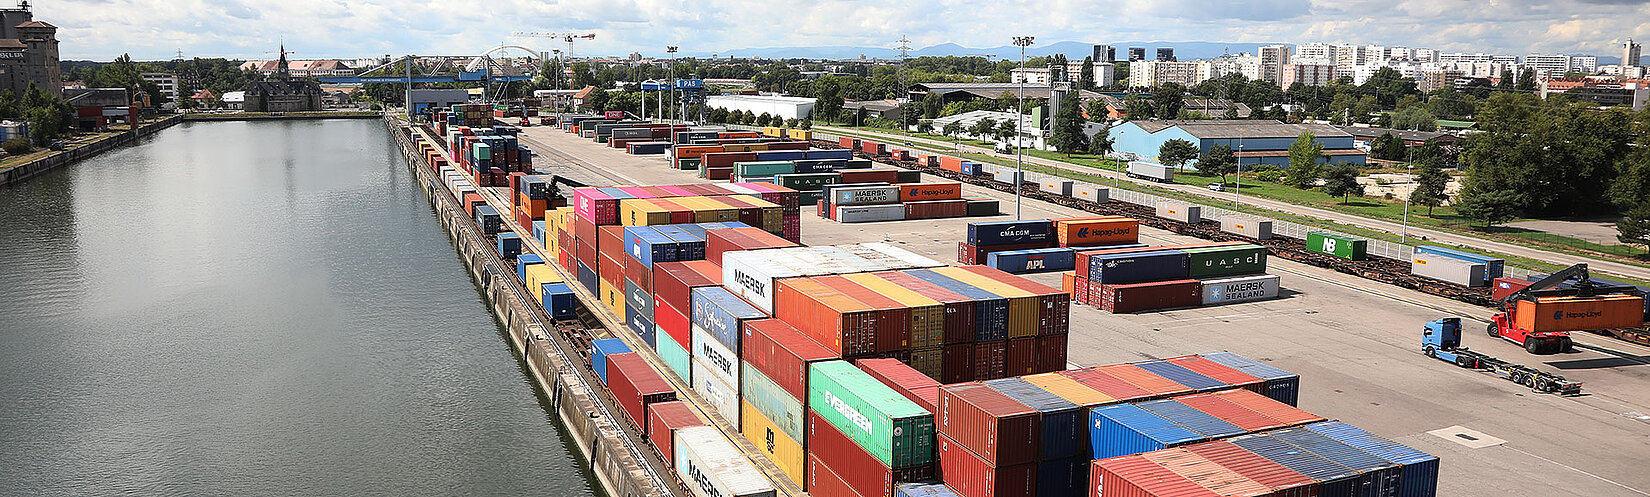 Container Terminal Straßbourg-Nord